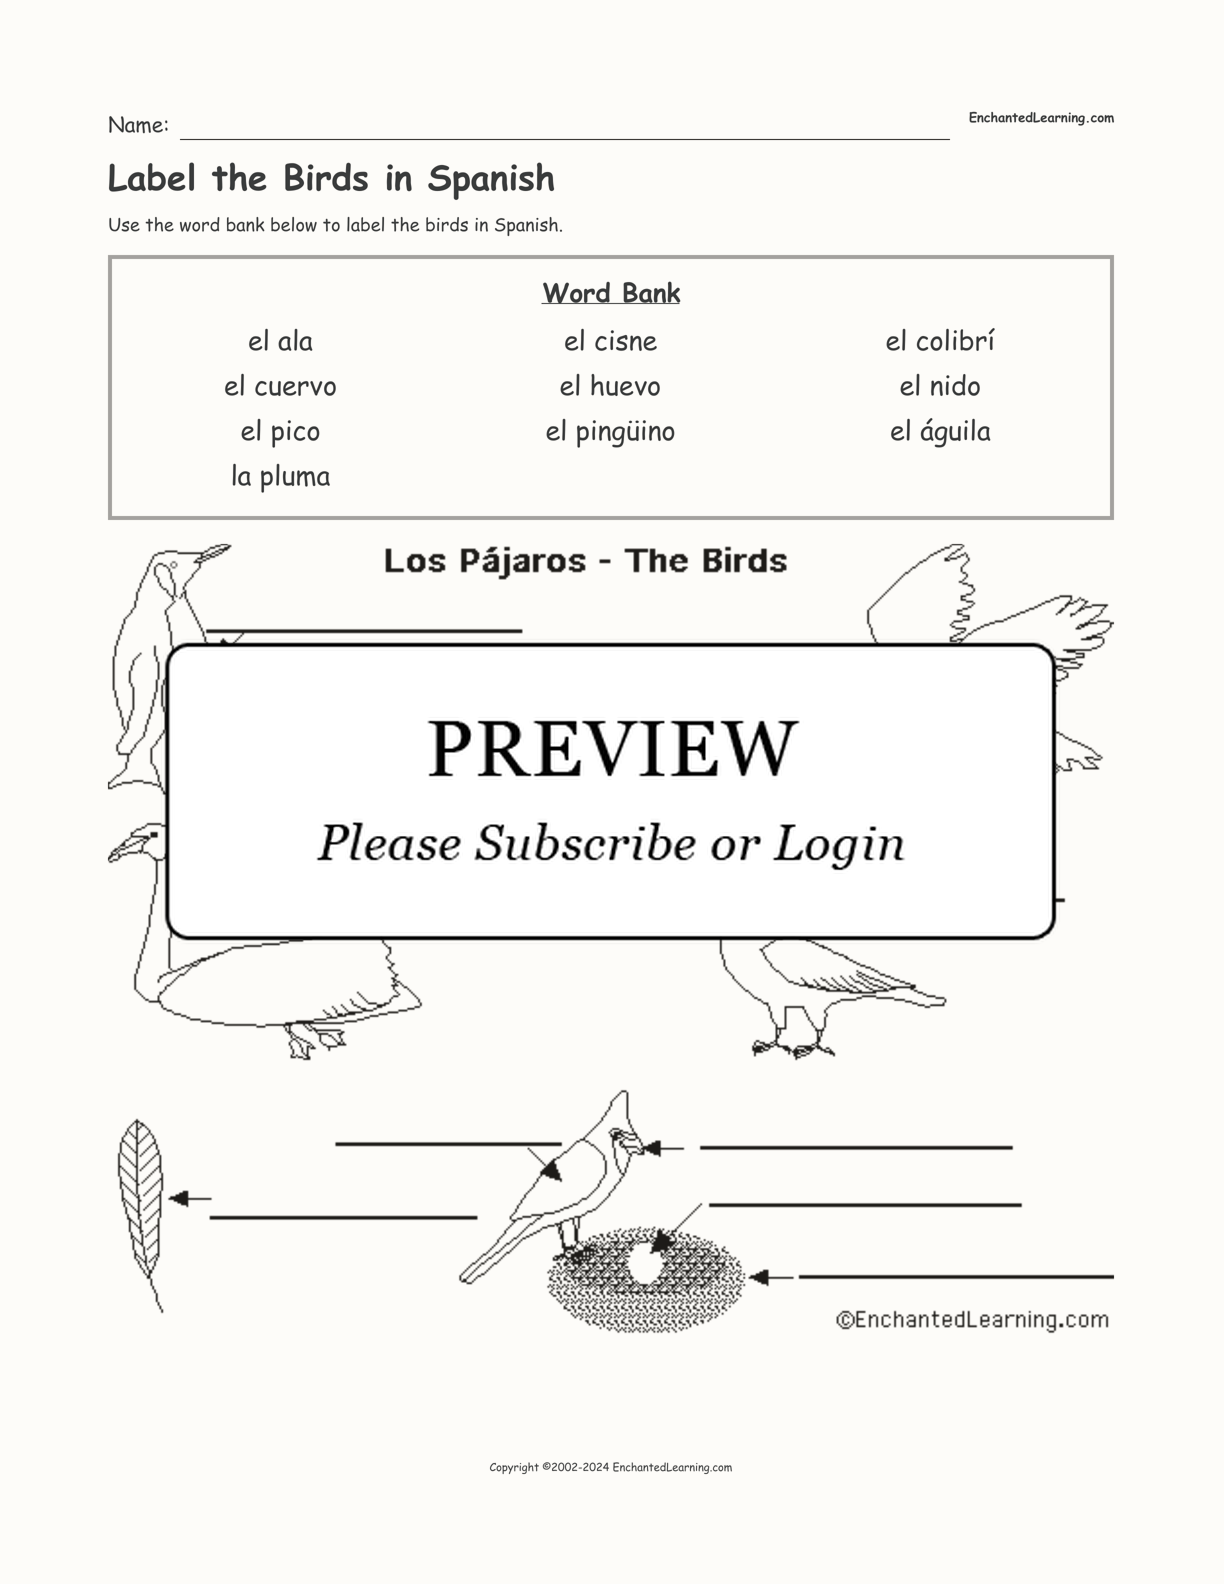 Label the Birds in Spanish interactive worksheet page 1